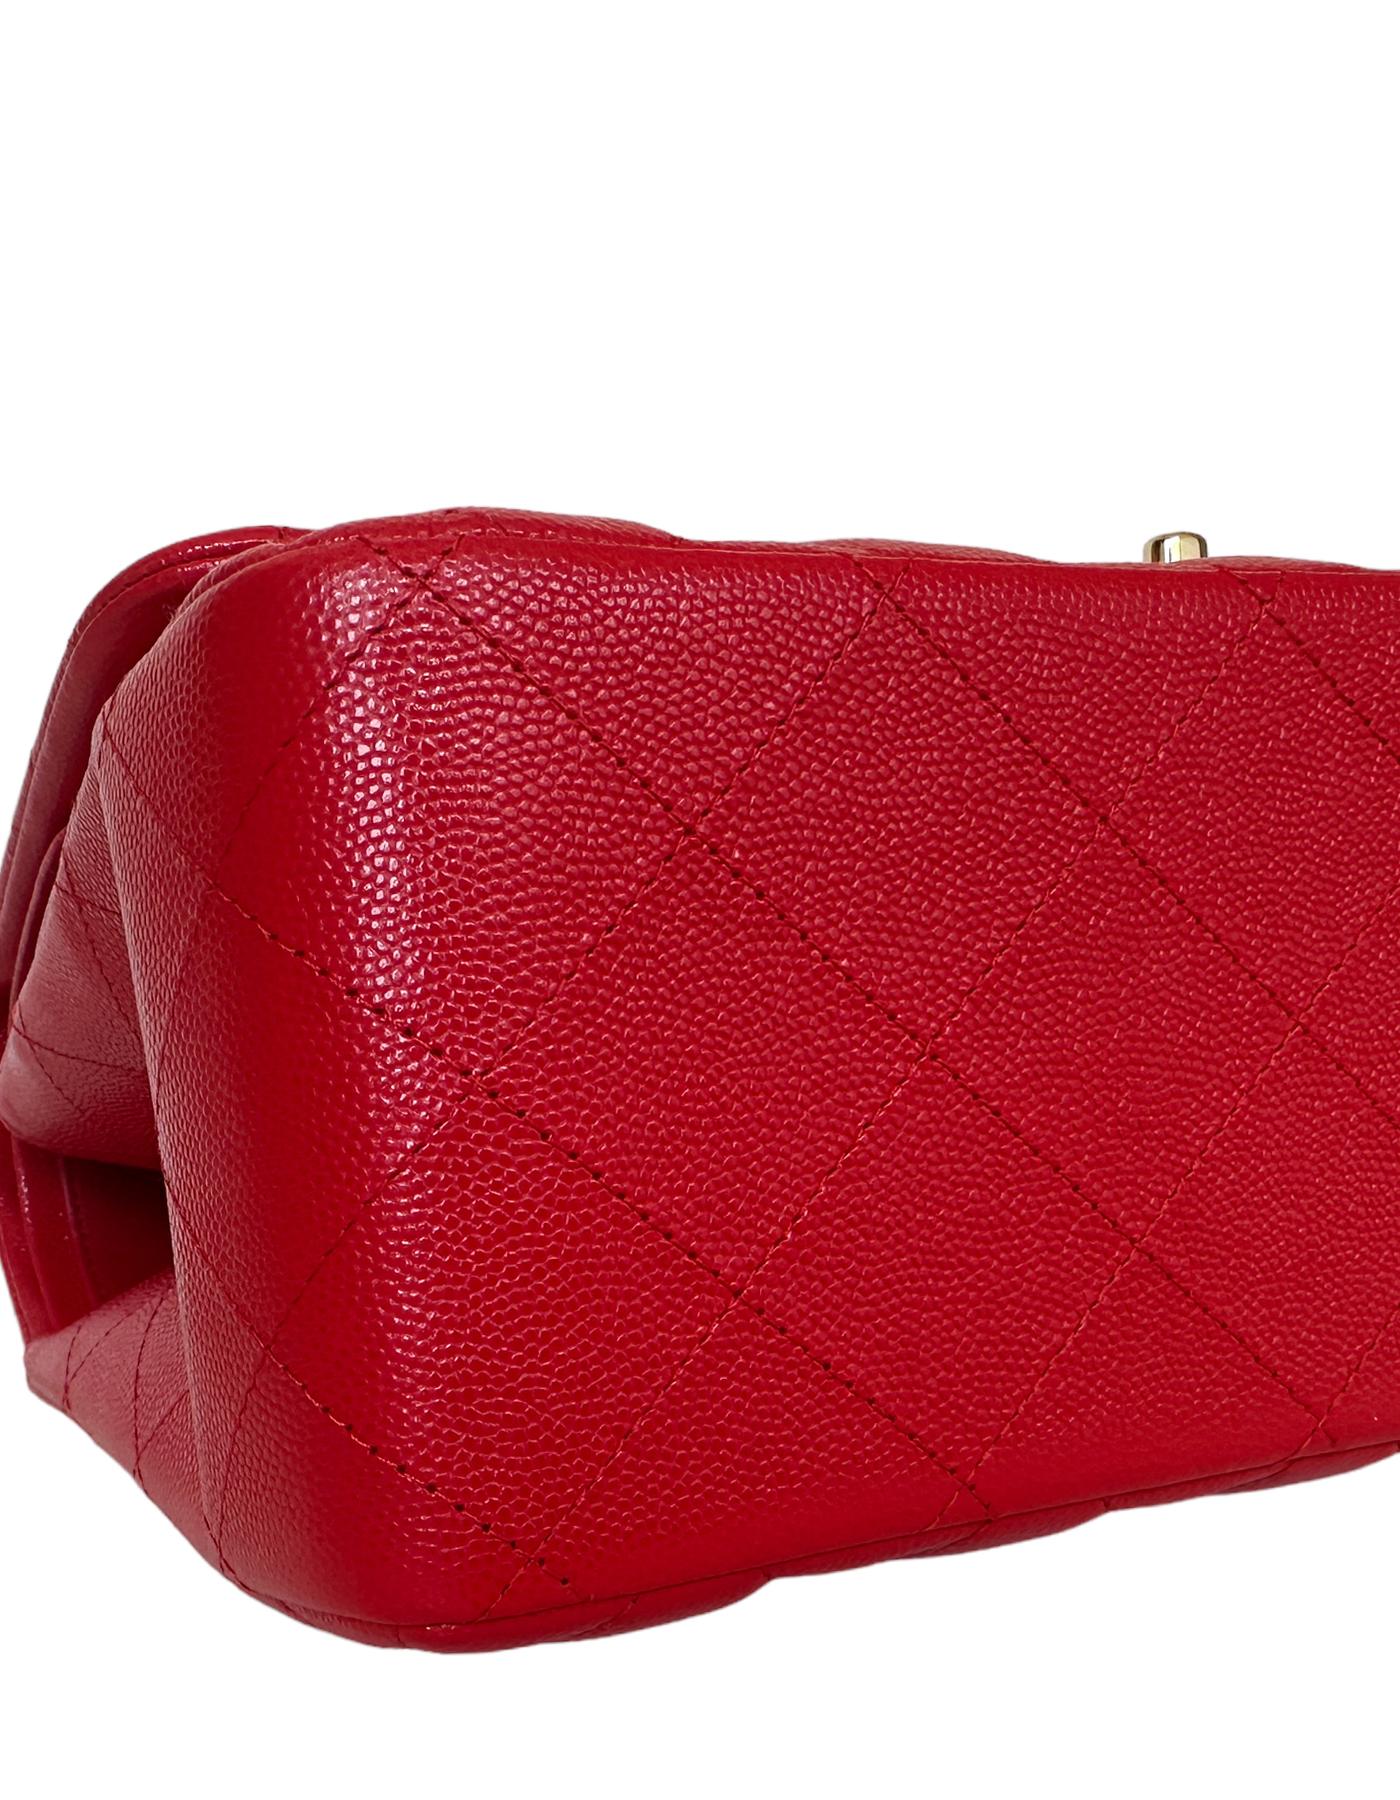 Chanel Red Caviar Leather Quilted Classic Double Flap Jumbo Bag 1